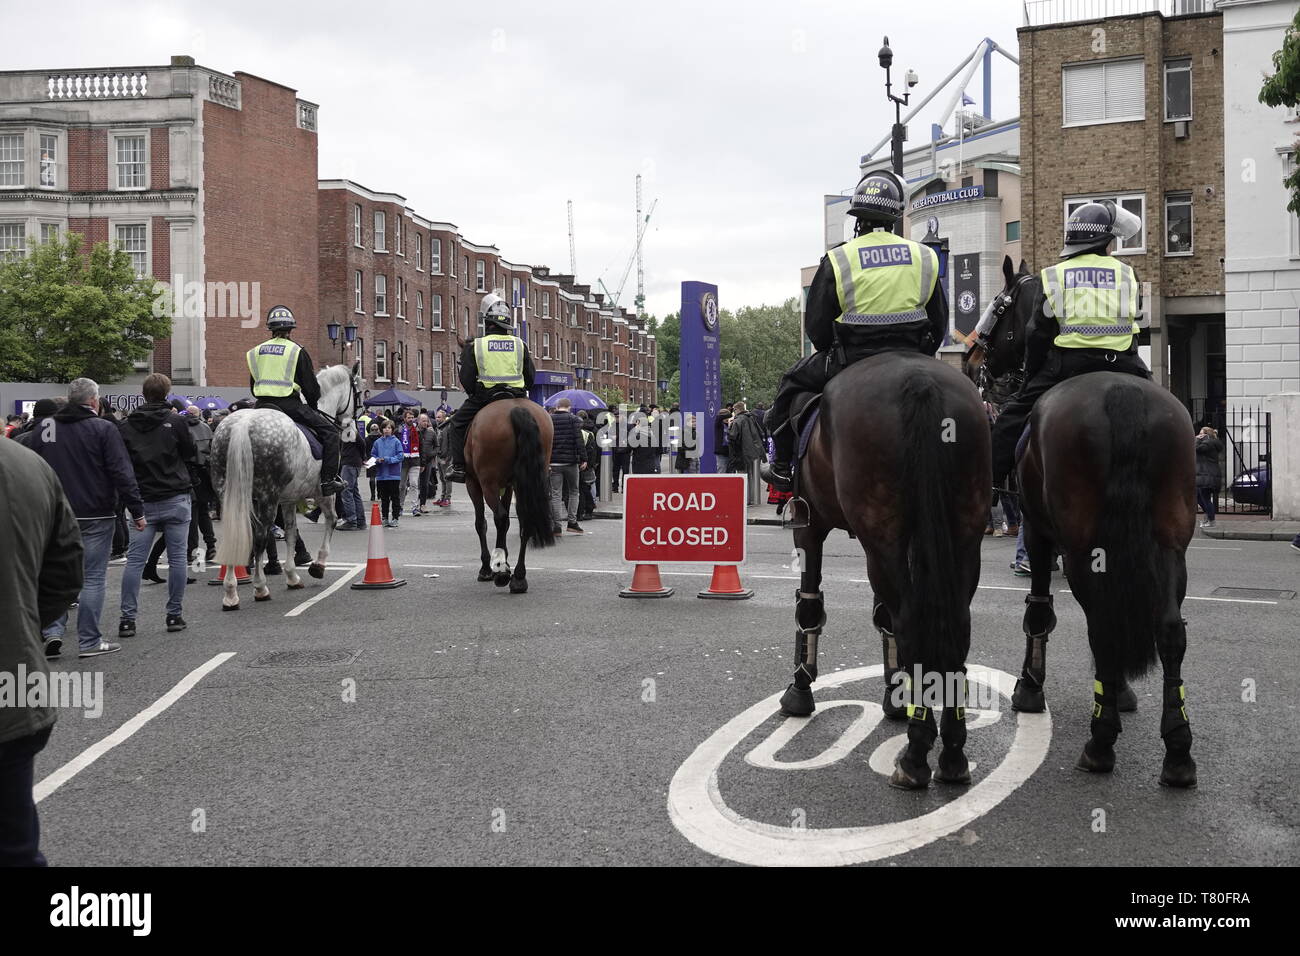 Chelsea, London, UK. 9th May, 2019. Police scour the streets before the Europa League Semi Final second leg match between Chelsea FC and Eintracht Frankfurt FCm where they were on the look out for German fans arriving without tickets, and causing trouble. Credit: Motofoto/Alamy Live News Stock Photo